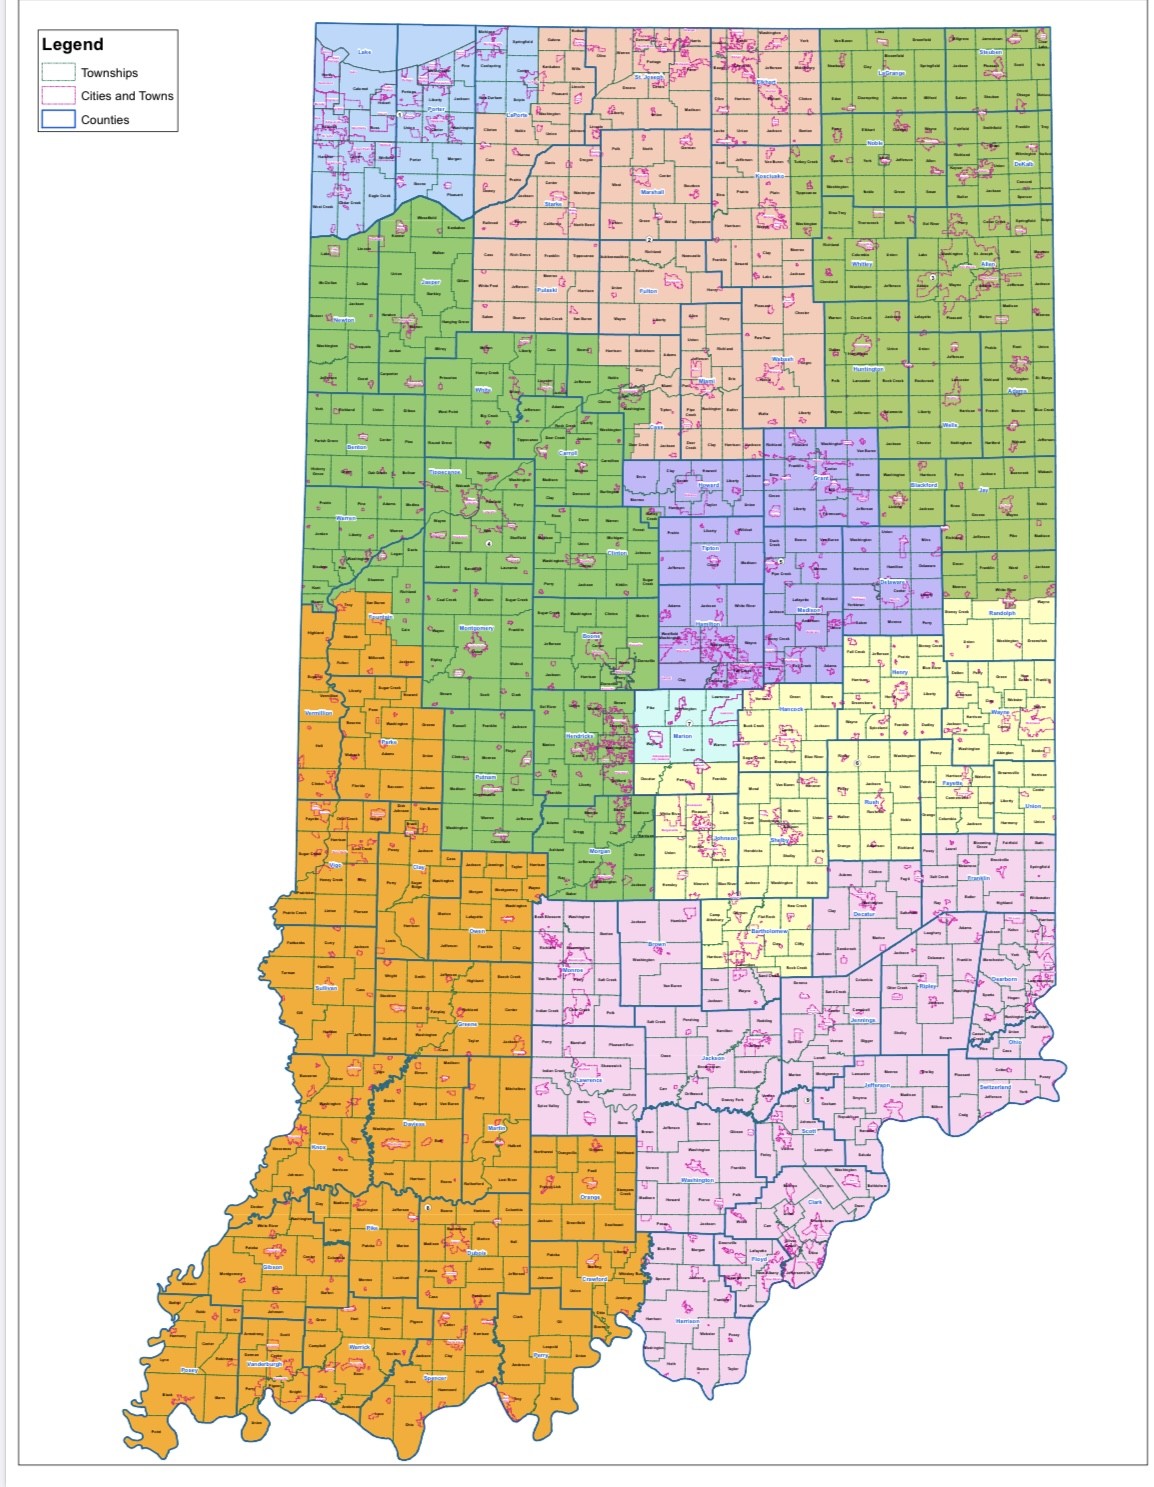 Indiana State House Map The New Maps Are Out: See Them Here And Follow For Updates - The Indiana  Citizen